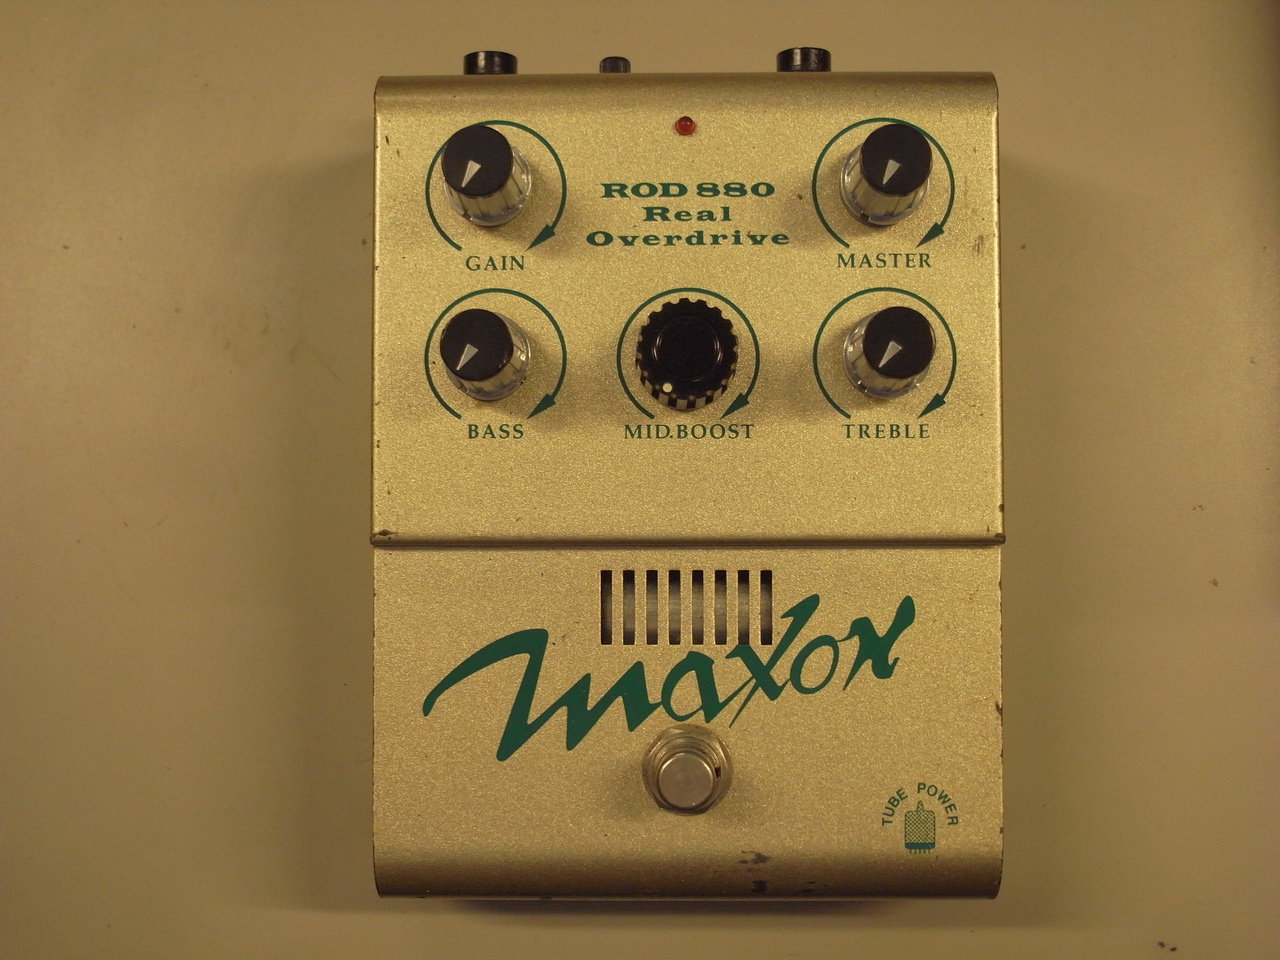 maxon rod880 real overdrive